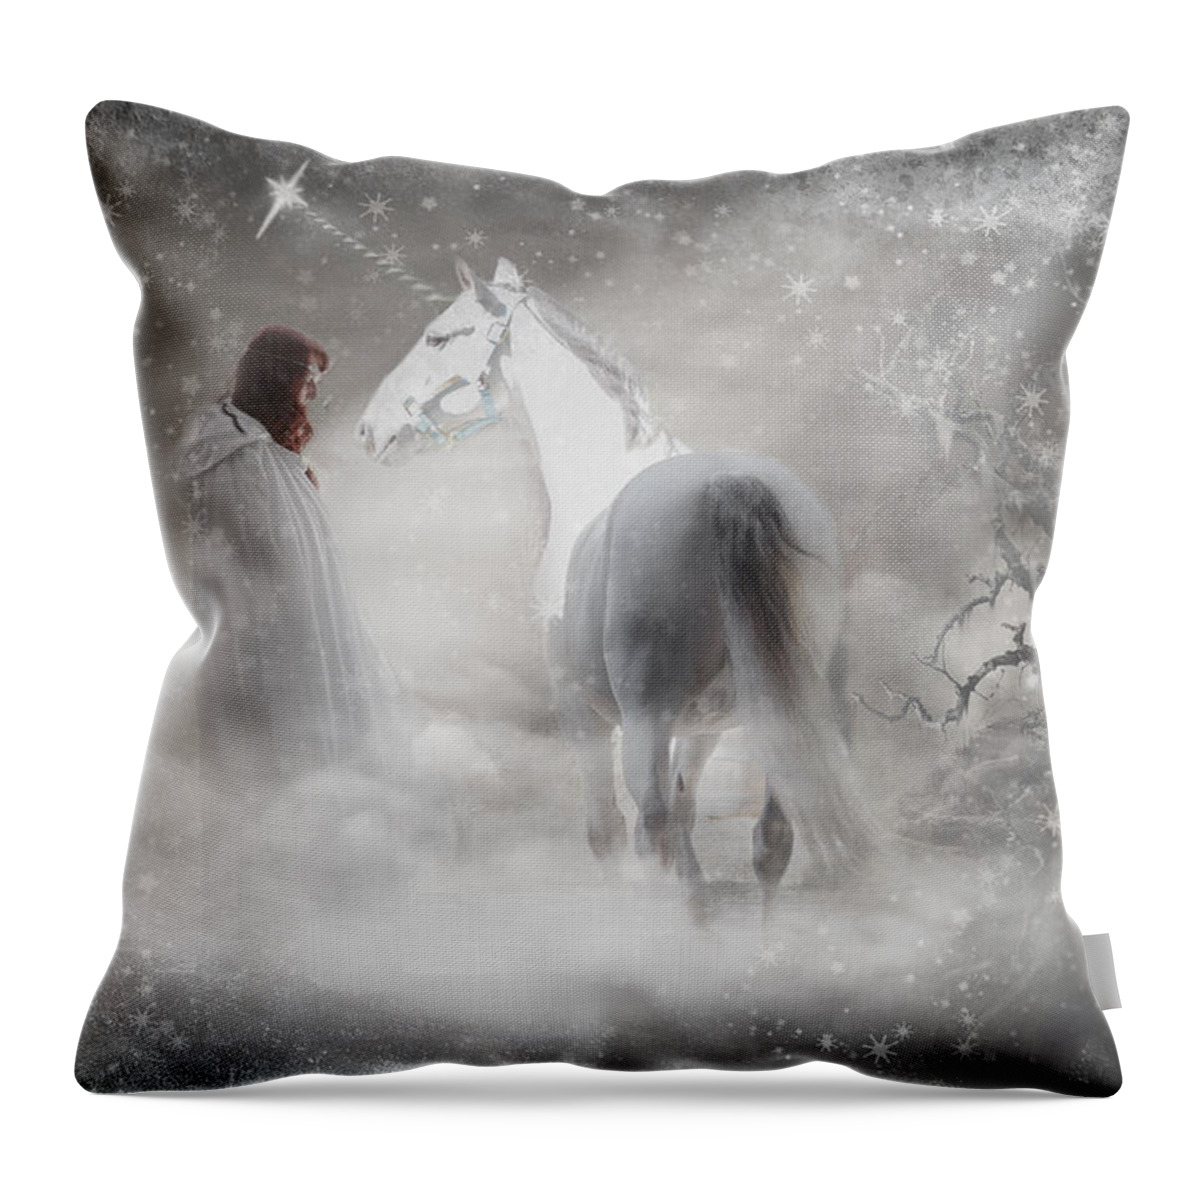 In Honor Of The Unicorn Throw Pillow featuring the photograph In Honor Of The Unicorn by Wes and Dotty Weber